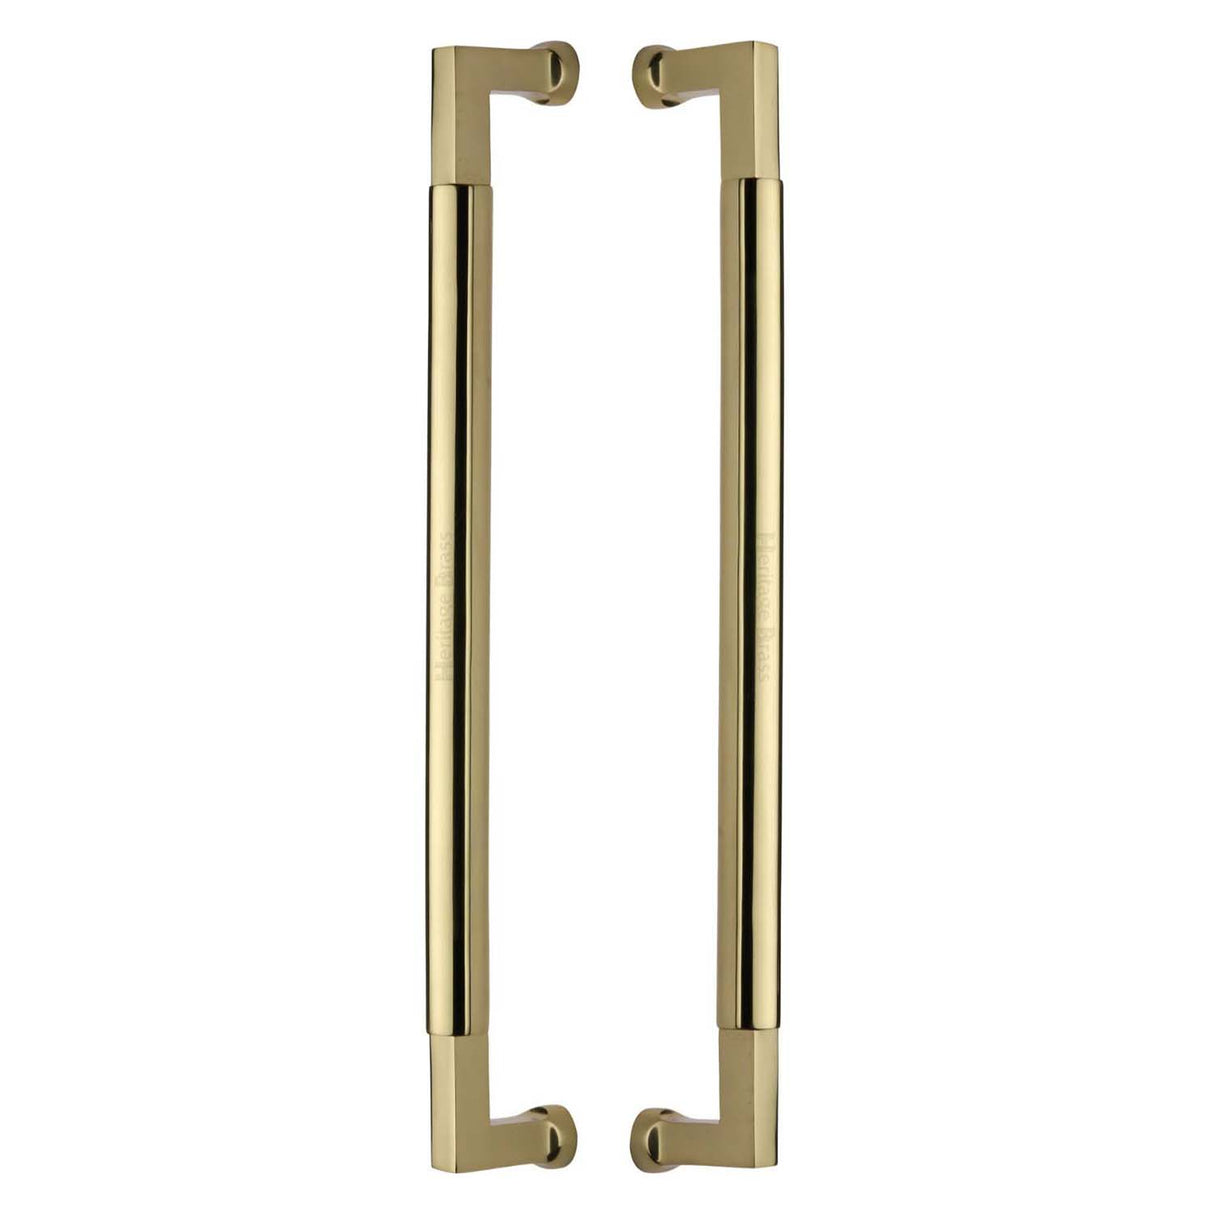 This is an image of a Heritage Brass - Door Pull Handle Bauhaus Design 483mm Polished Brass Finish, btb1312-483-pb that is available to order from Trade Door Handles in Kendal.